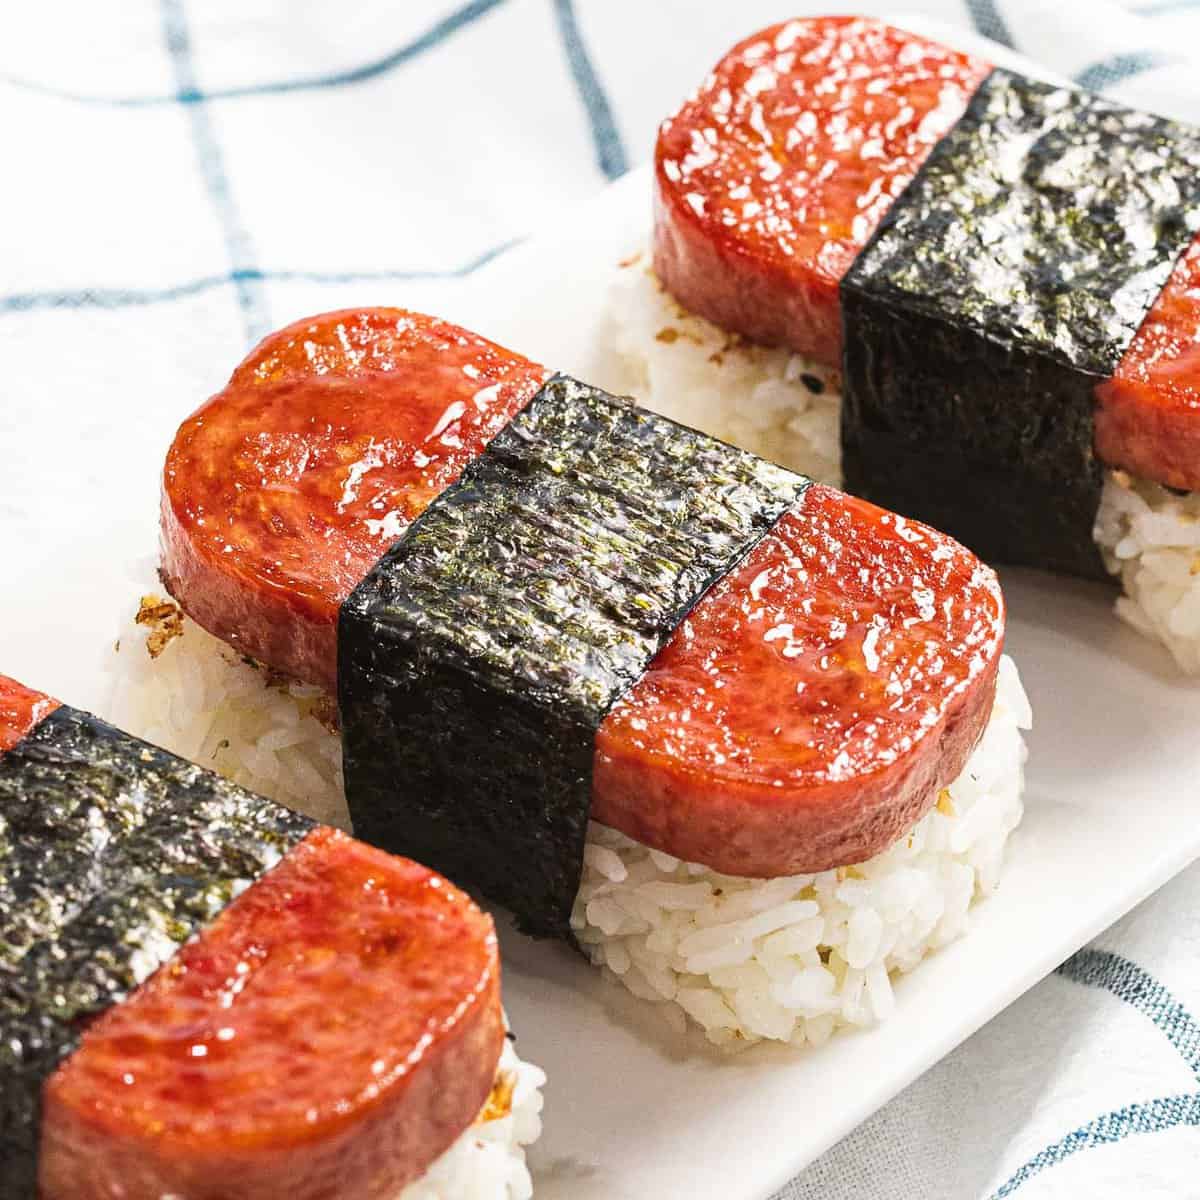 Spam musubi, rice and spam wrapped with nori seaweed.